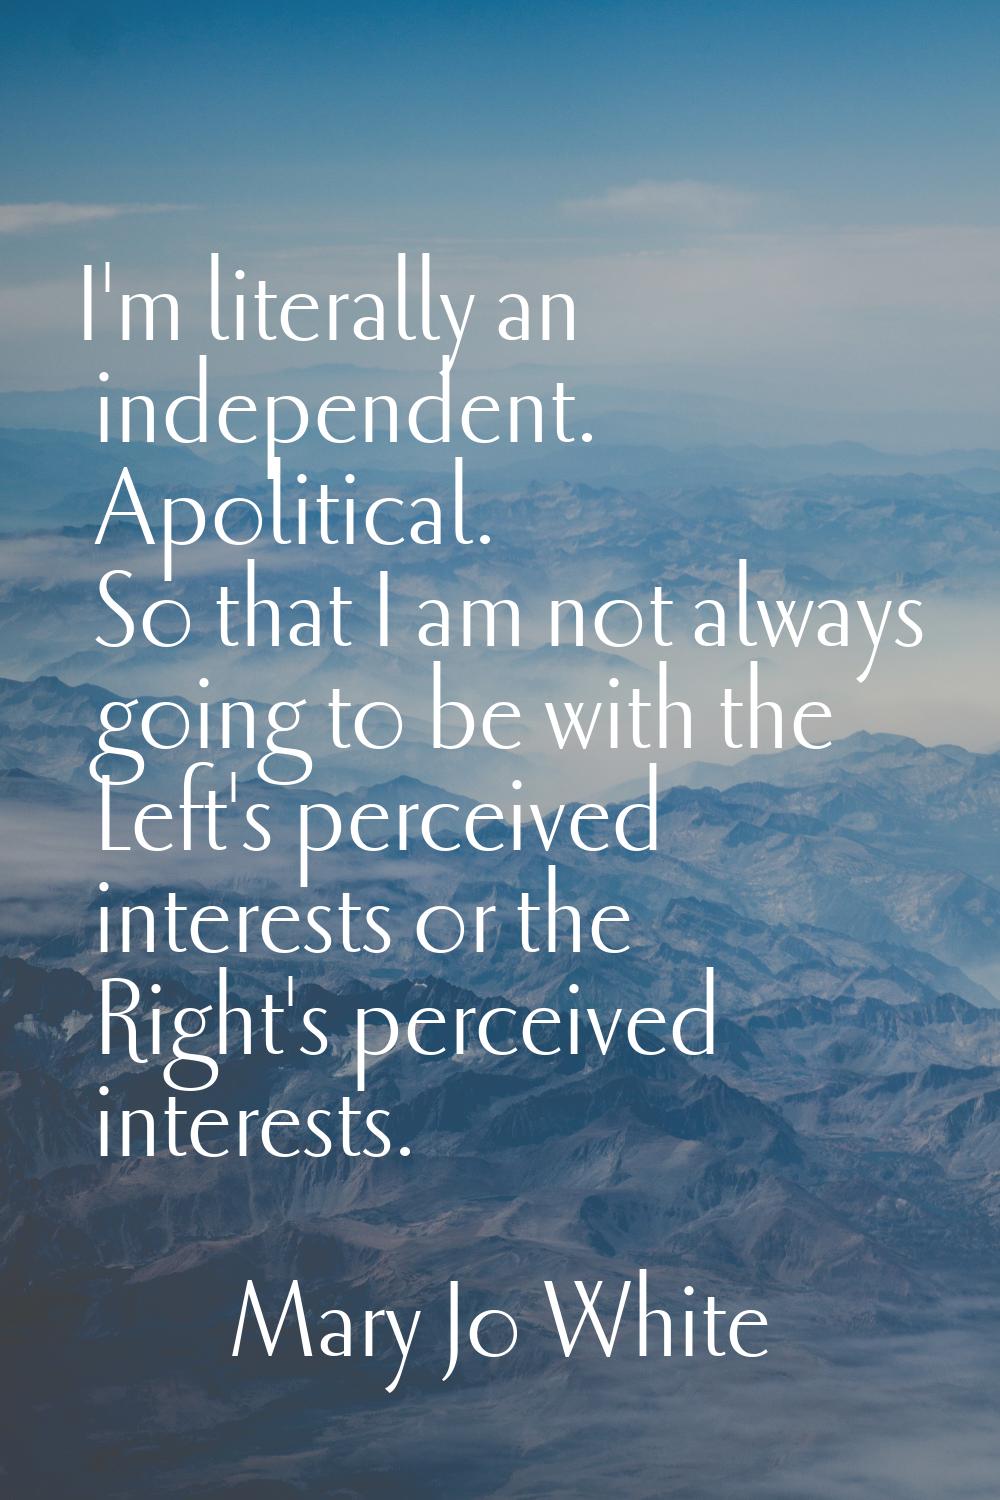 I'm literally an independent. Apolitical. So that I am not always going to be with the Left's perce